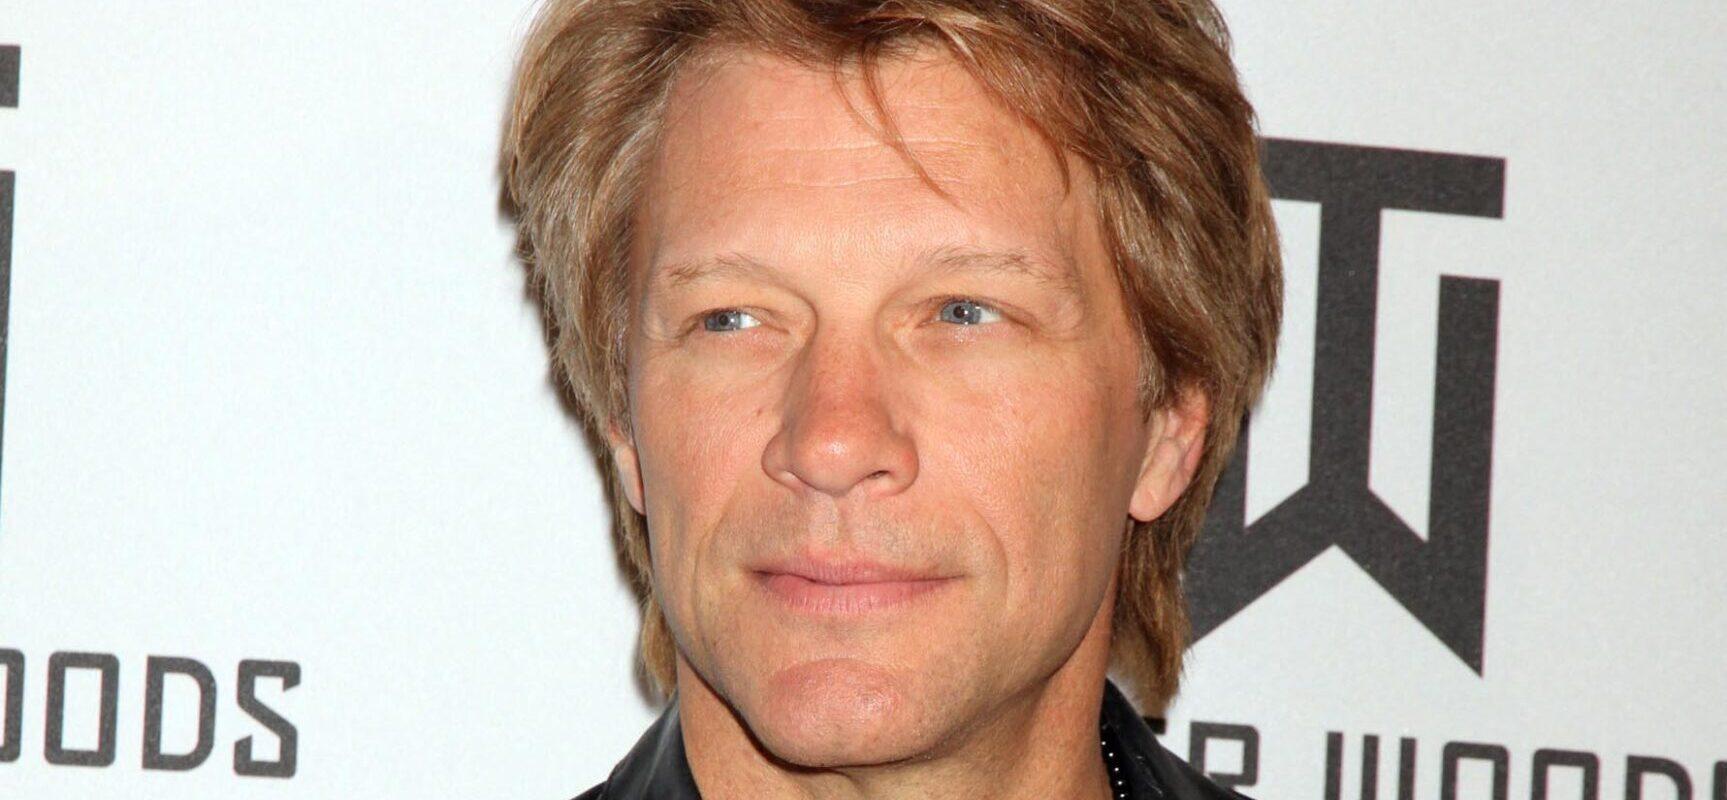 Jon Bon Jovi On The Road To Recovery: 'Not A Day Of It Is Easy'